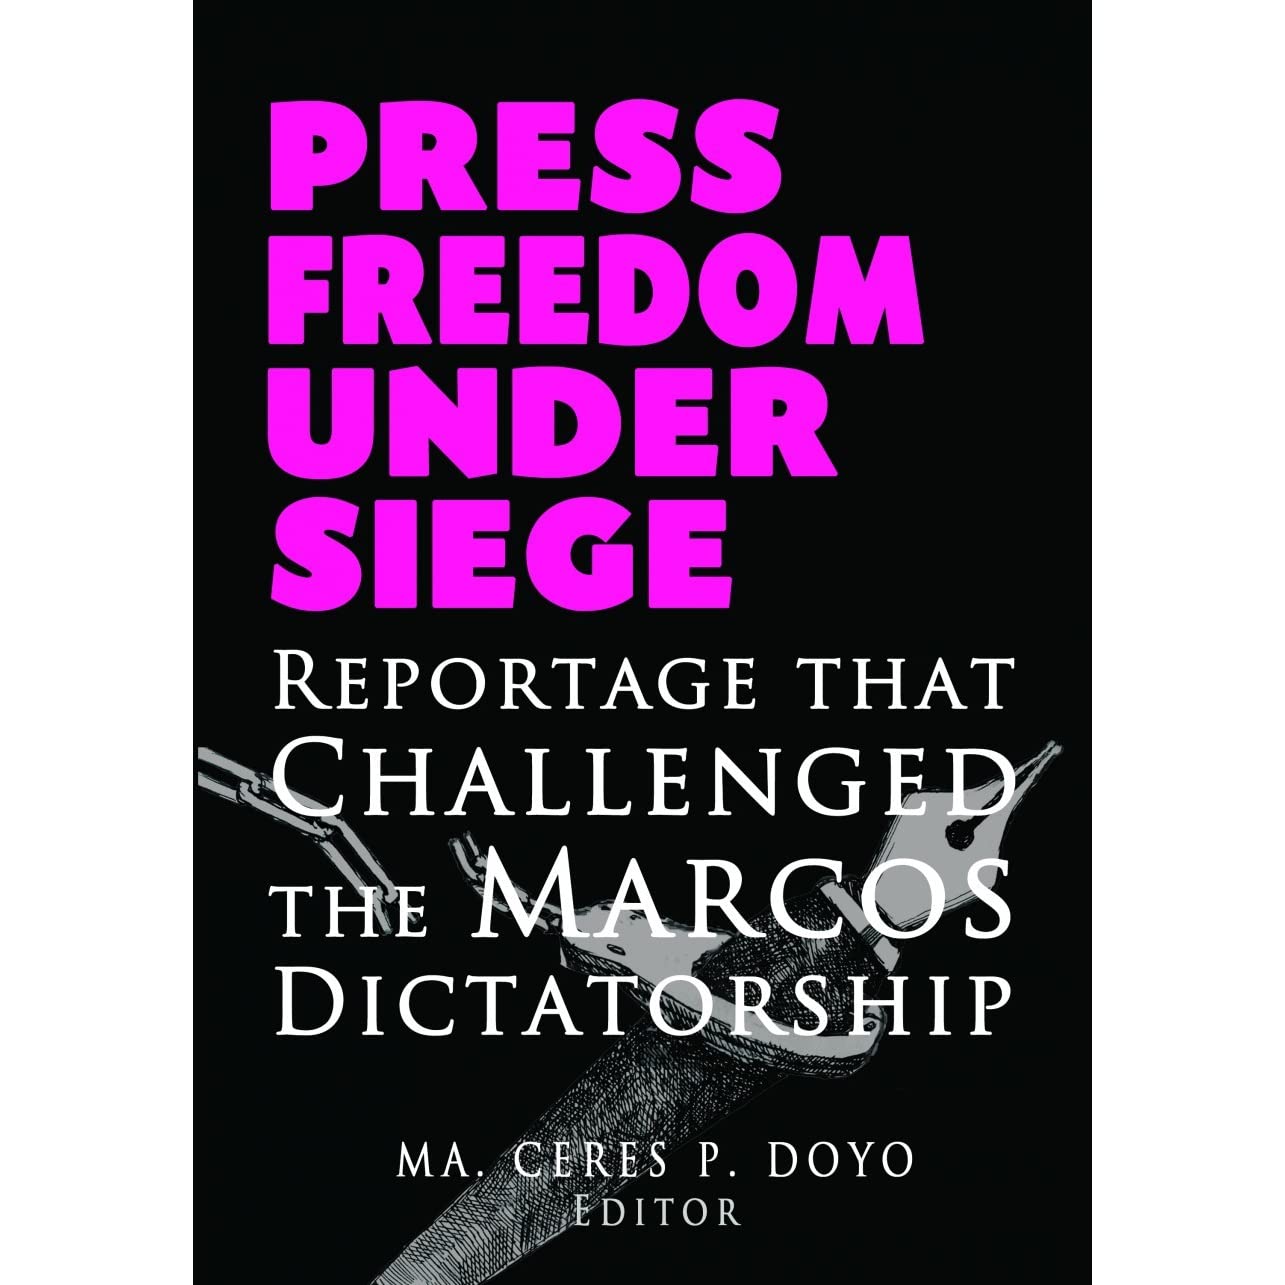 Press freedom under siege reportage that challenged the Marcos dictatorship